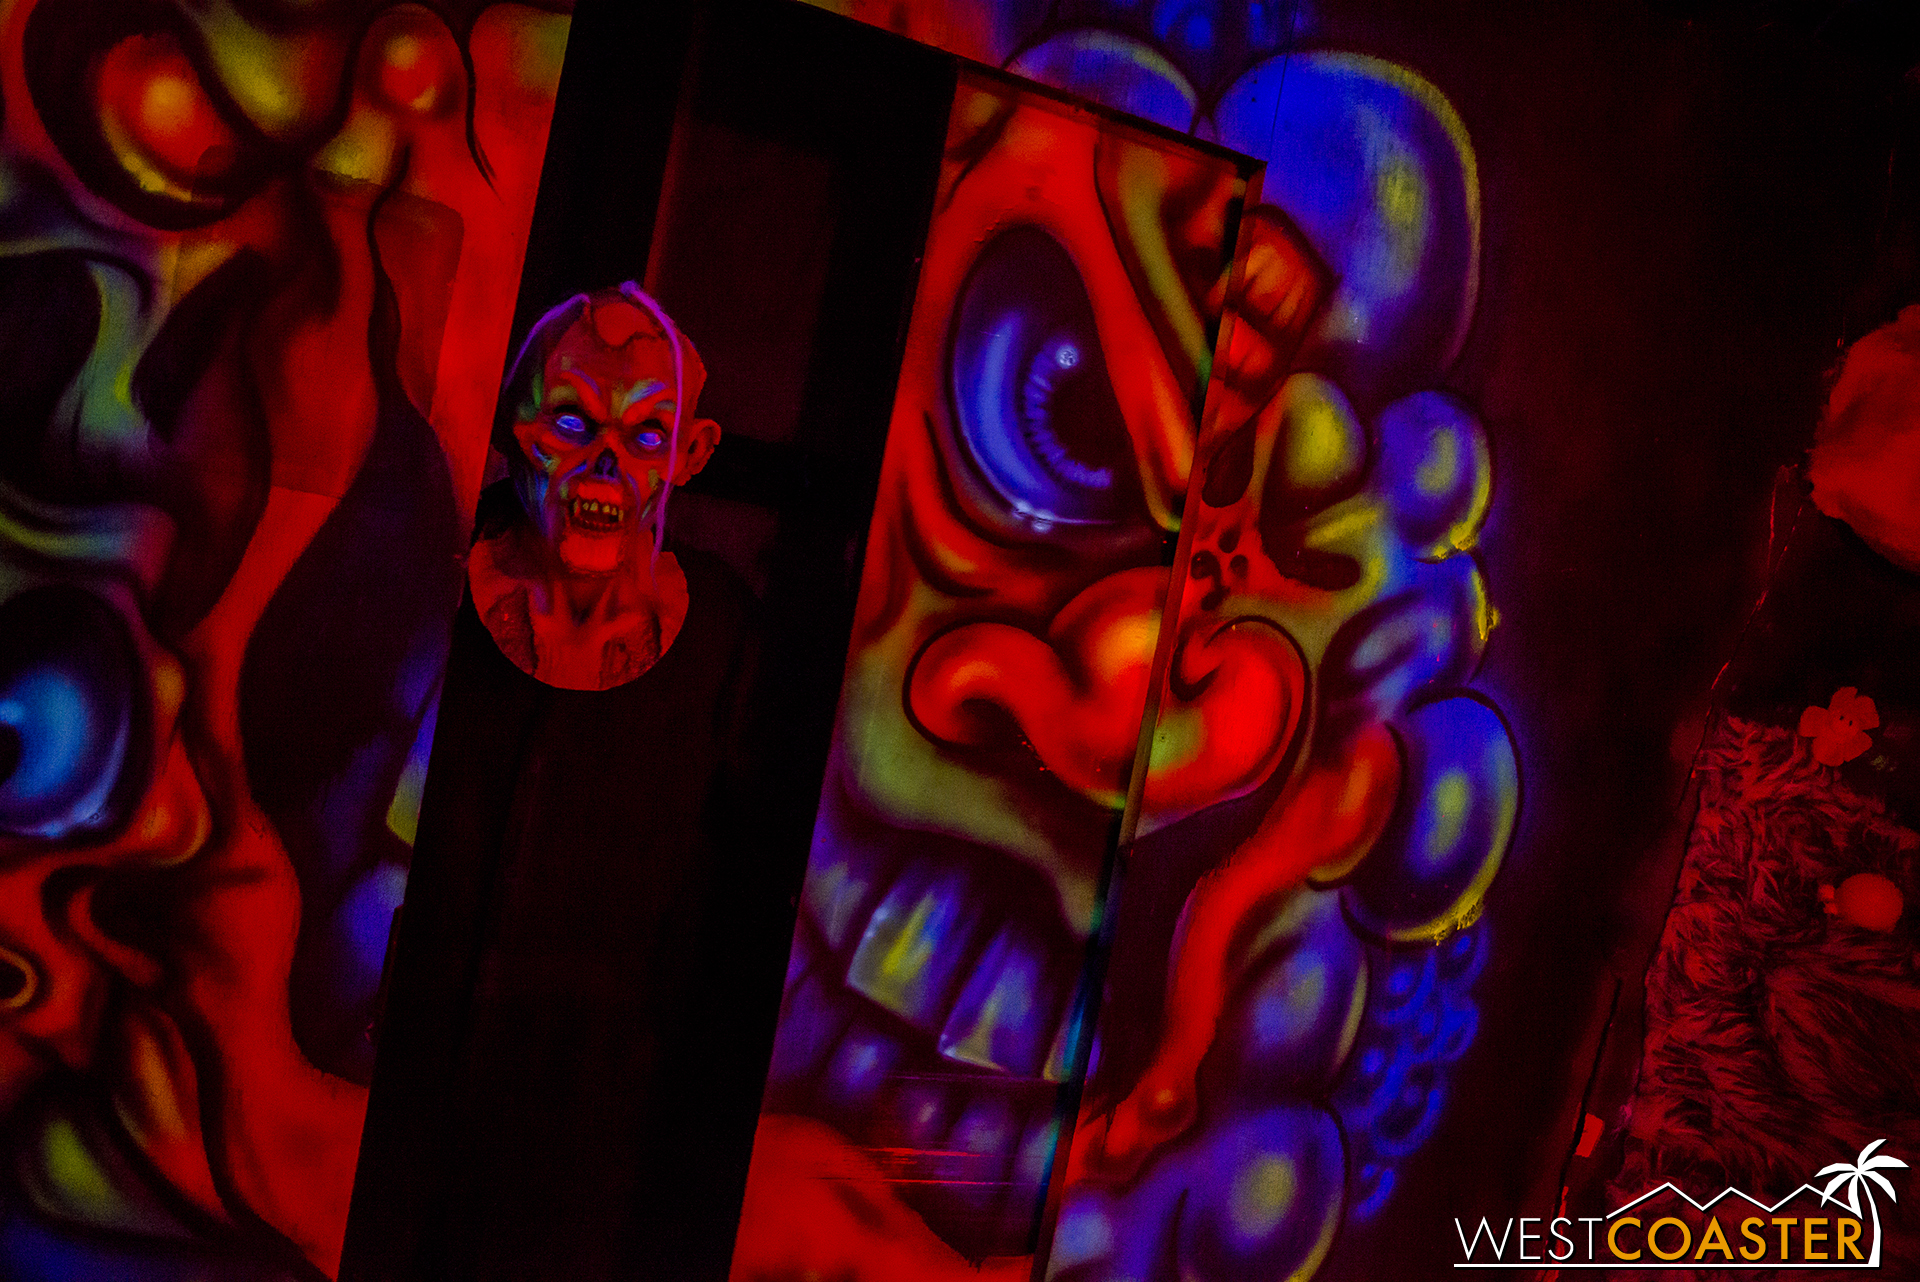  The 3D effect is achieved with black light painting and contrast of warm and cool colors to create depth. 